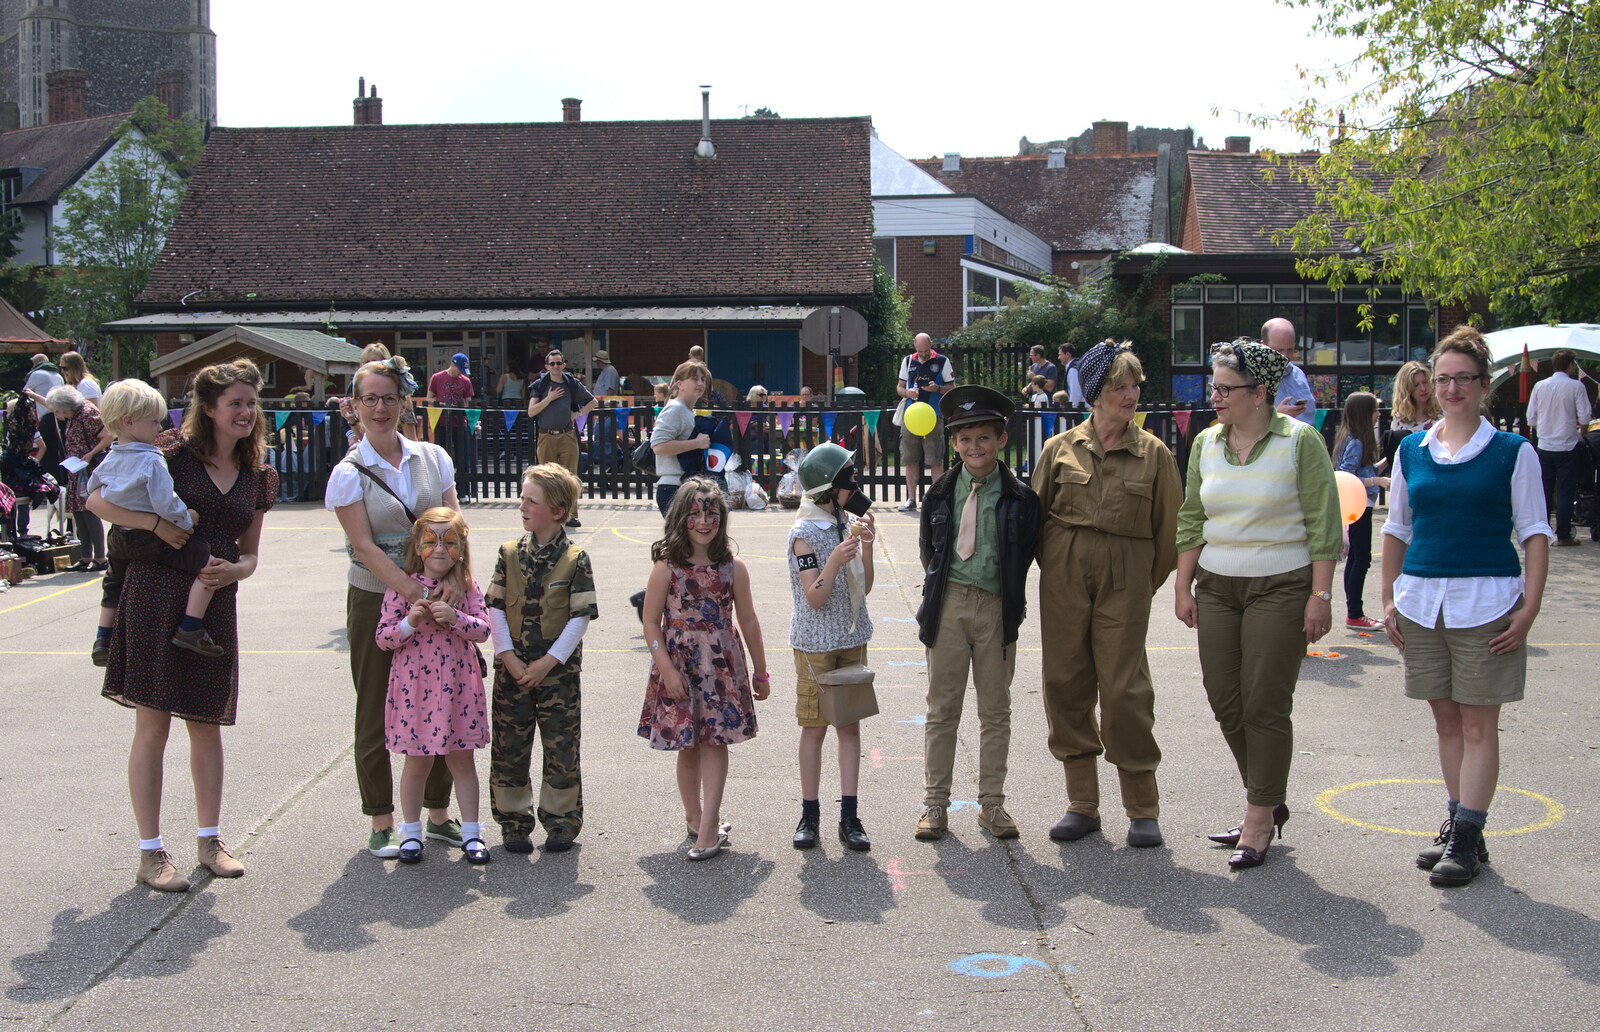 Contestants, including Suey line up for judging from St. Peter and St. Paul's School Summer Fete, Eye, Suffolk - 12th July 2014